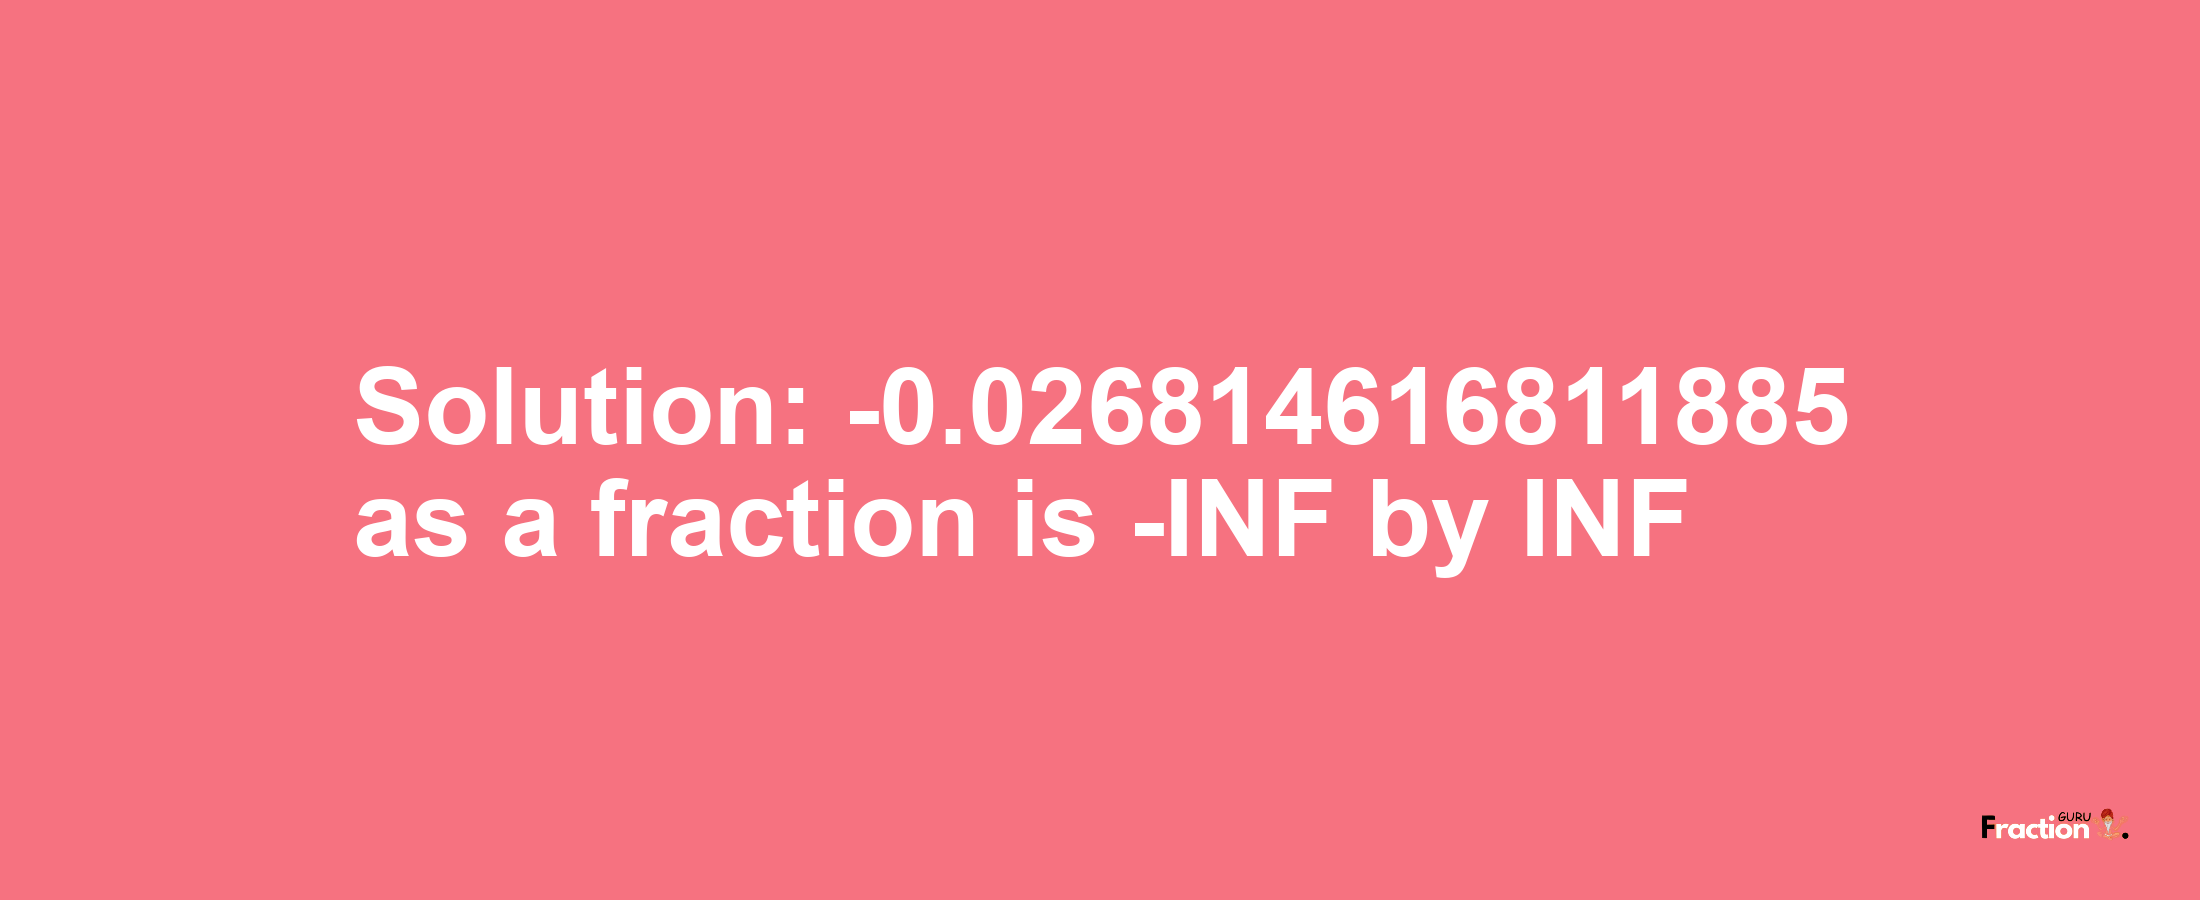 Solution:-0.026814616811885 as a fraction is -INF/INF